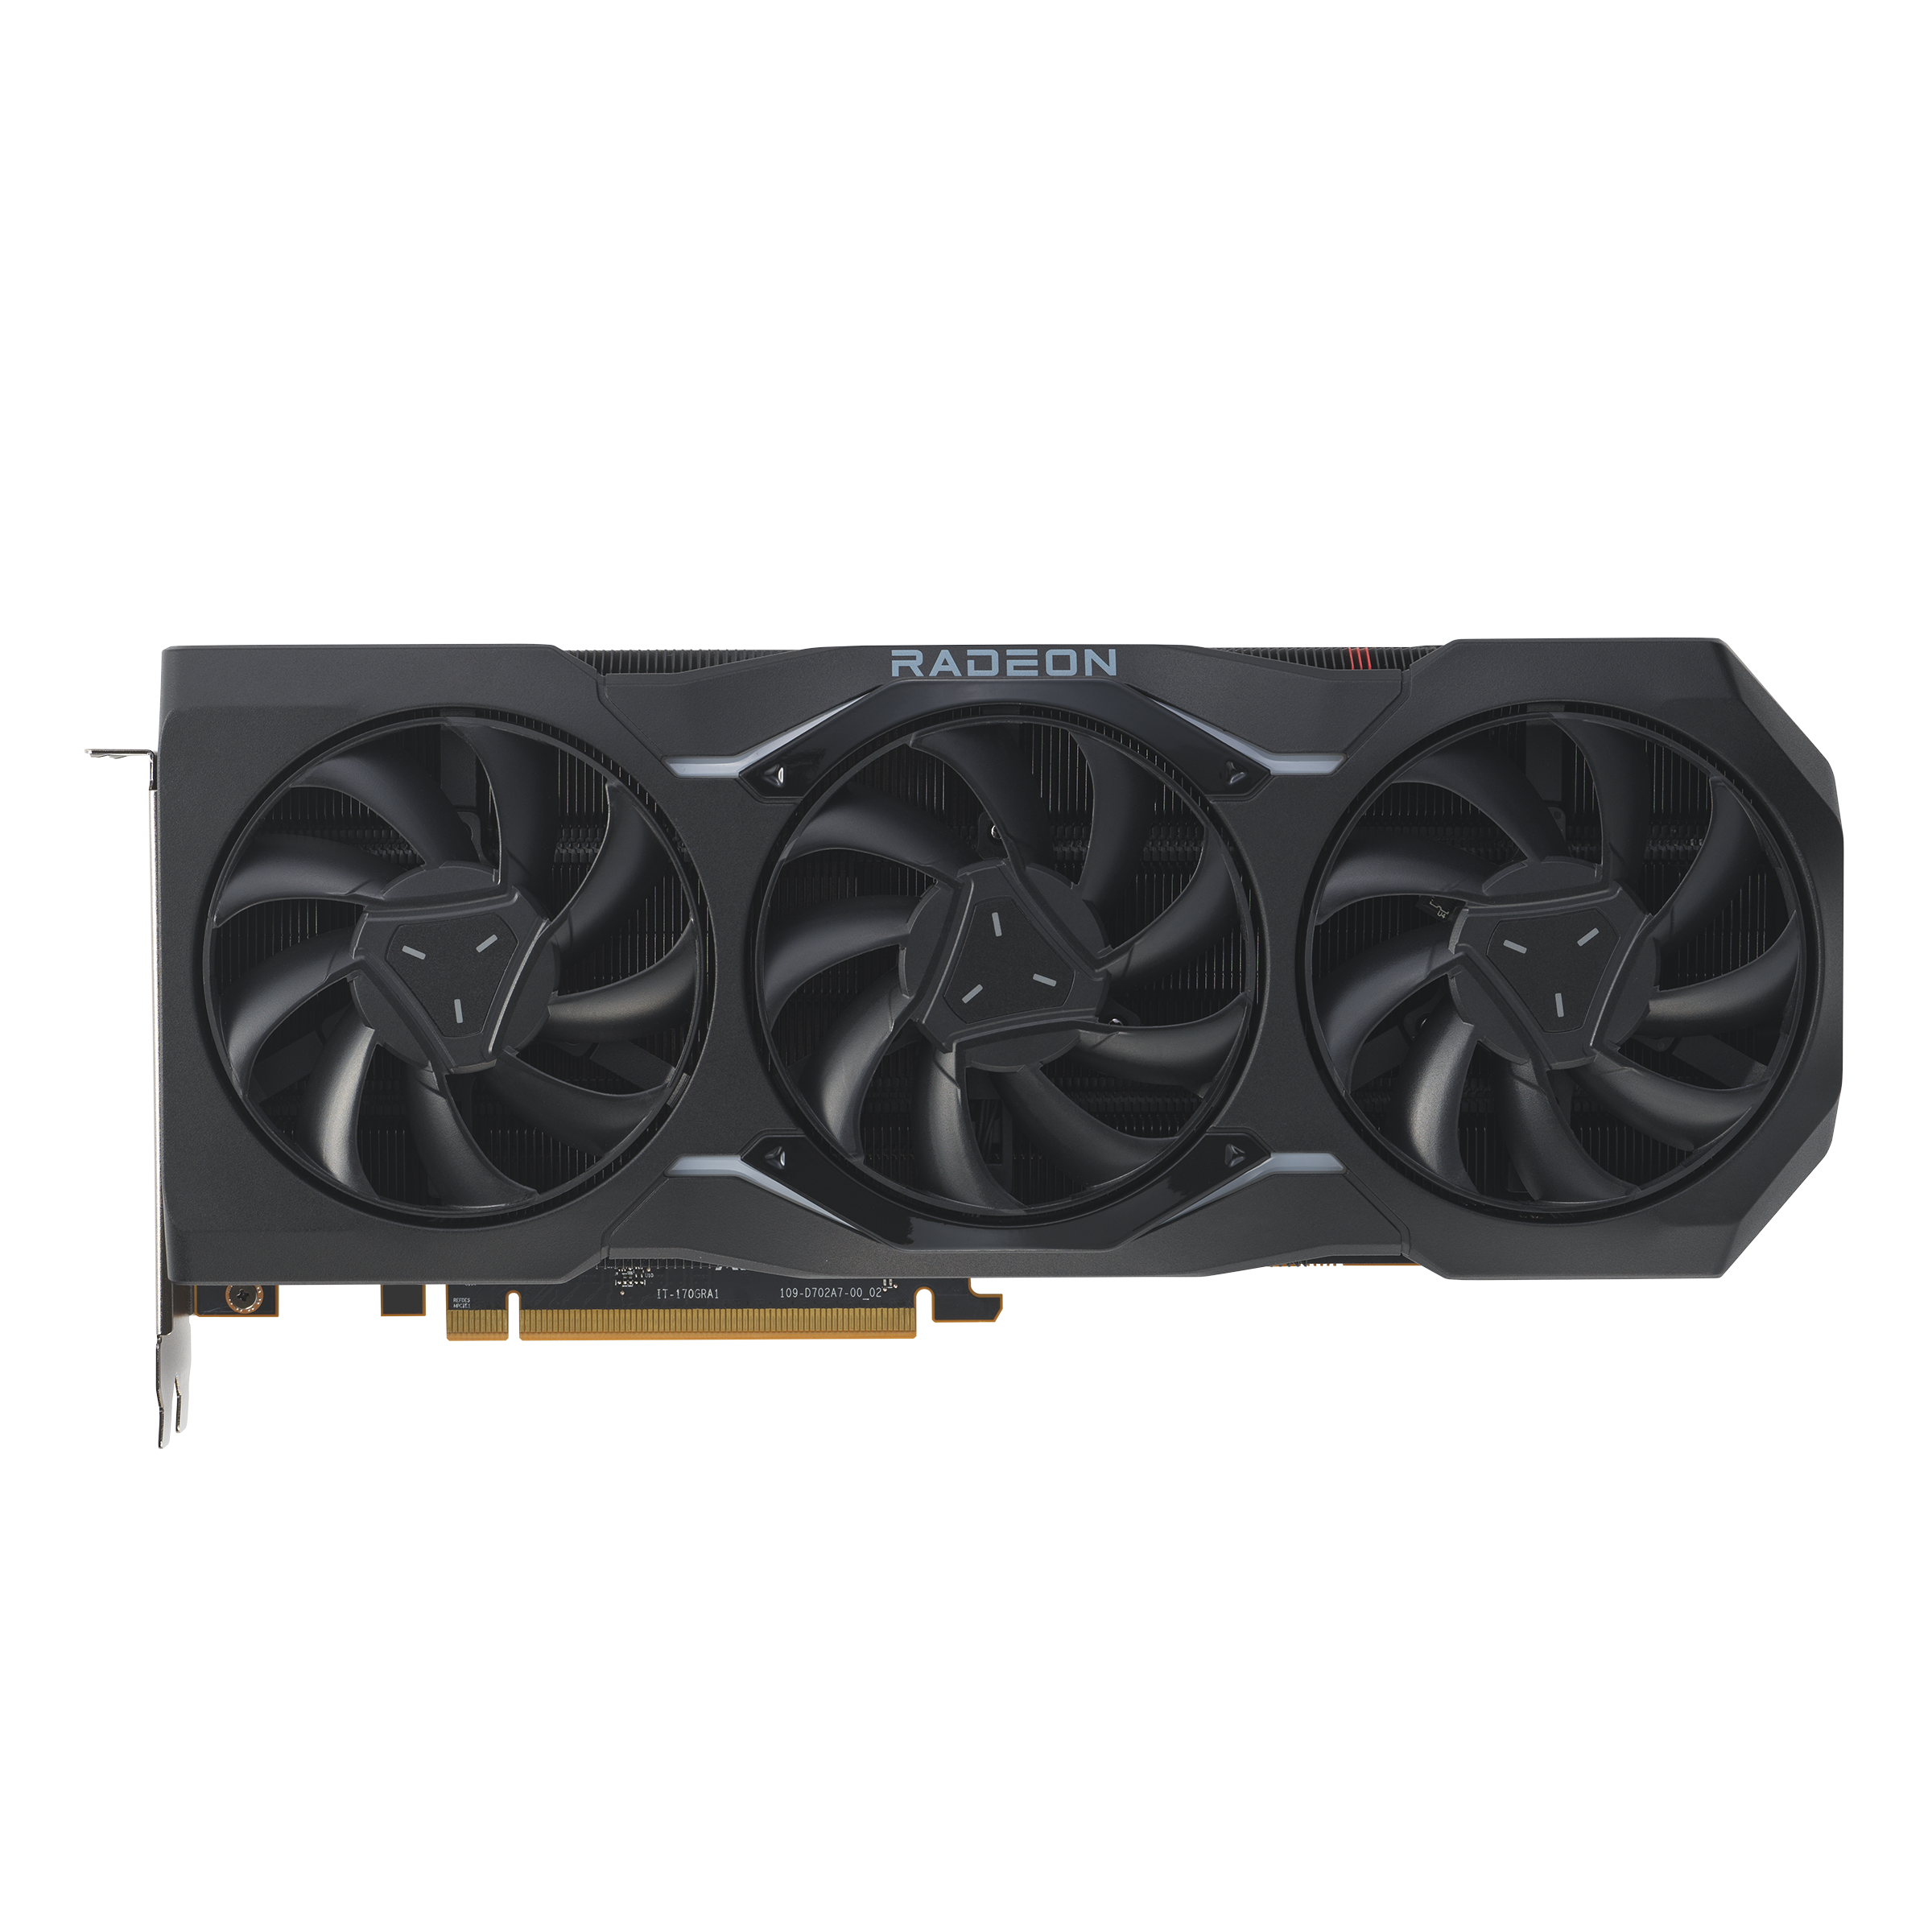 Sapphire Radeon RX 7900XTX and 7900XT reference cards show up on  